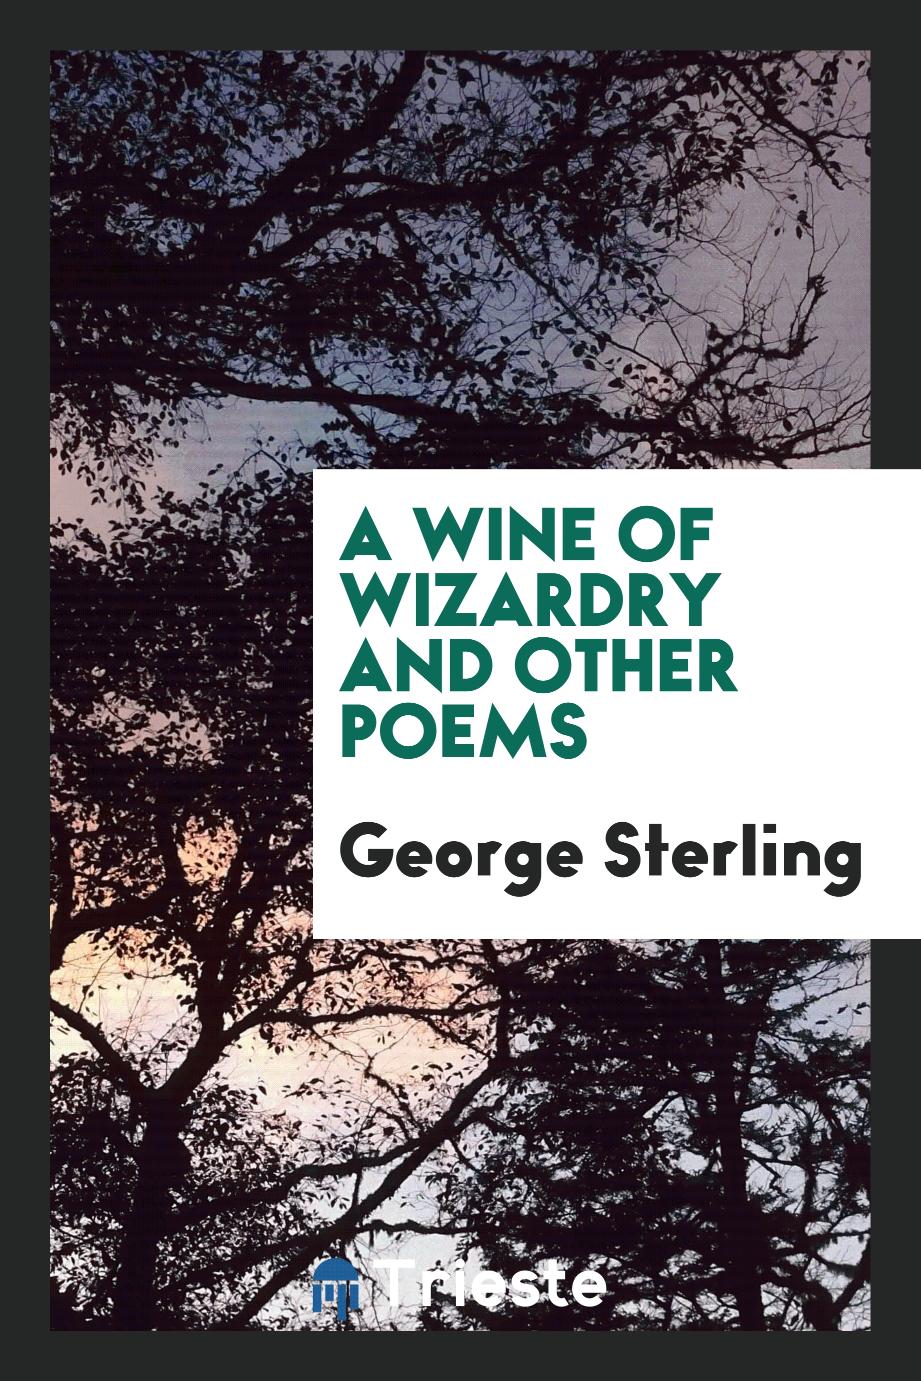 A wine of wizardry and other poems